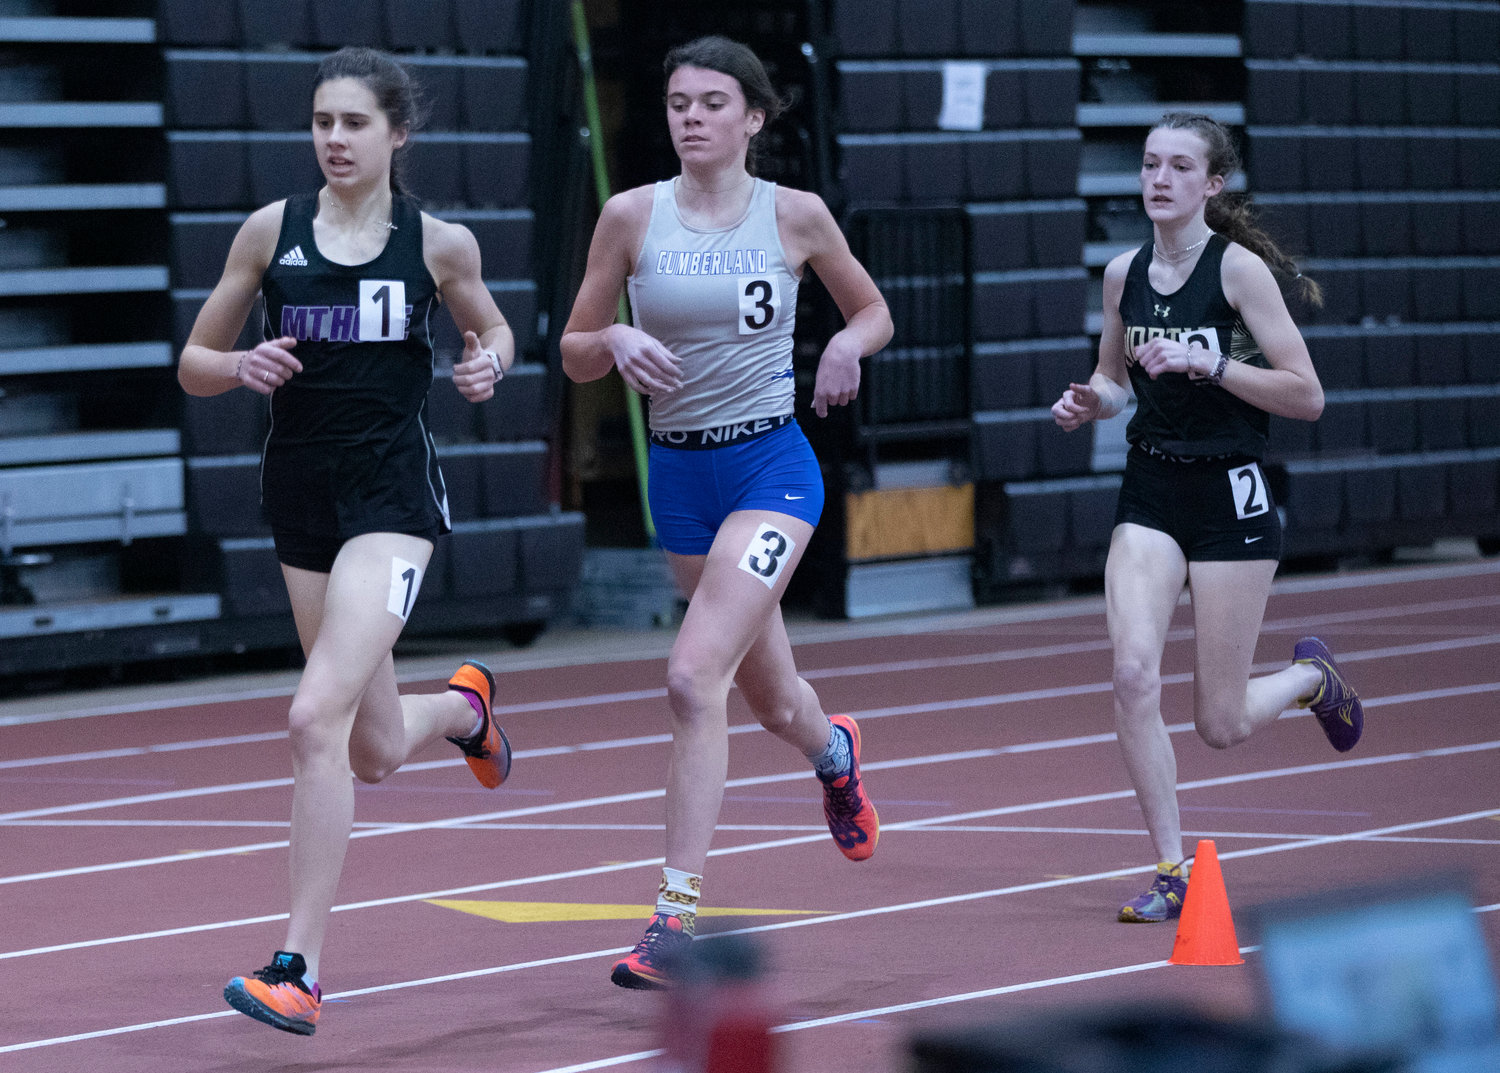 Jessica Deal scored 28 points for the Huskies, winning gold in the 3000-meter and the 1500-meter runs. She also placed second in the 1000-meter run.